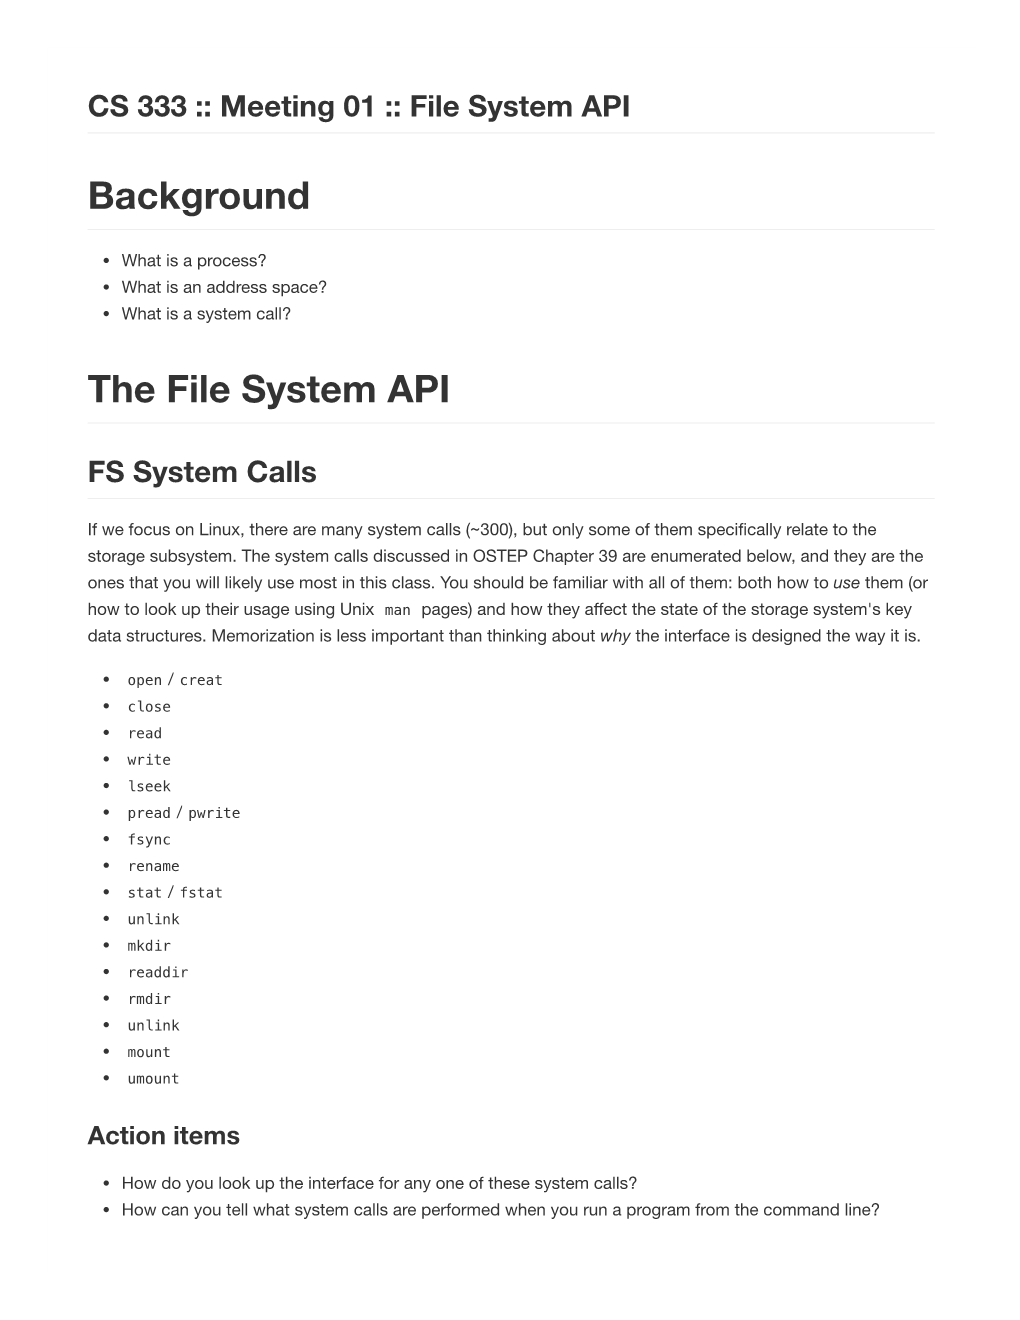 Background the File System